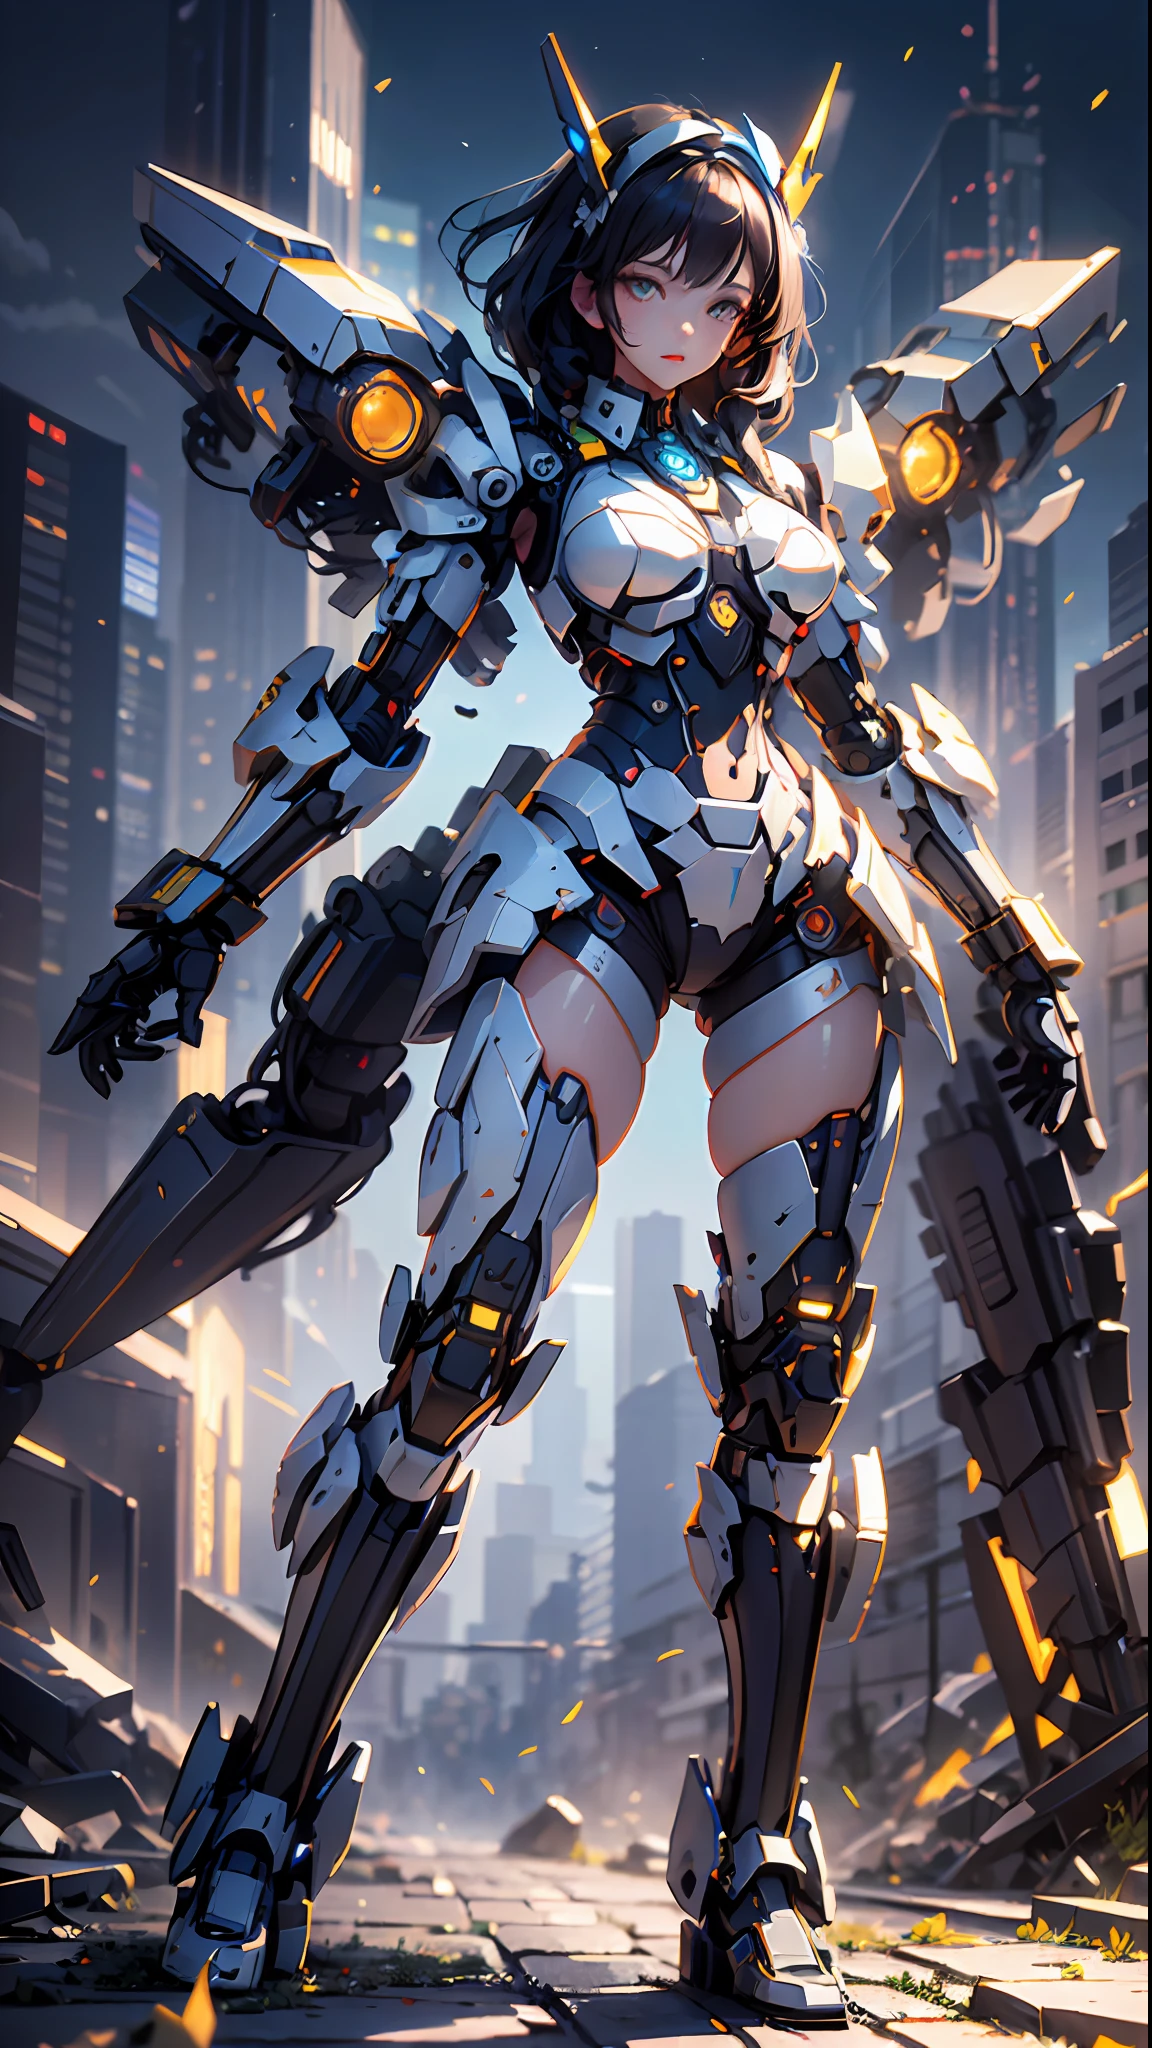 (Best Quality)), ((Masterpiece)), (Very Detailed: 1.3), 3D, Icaru valkirie-mecha, Beautiful cyberpunk woman wearing crown, with master chef style armor, sci-fi technology, HDR (High Dynamic Range), ray tracing, nvidia RTX, super resolution, unreal 5, subsurface scattering, PBR texture, post-processing, anisotropic filtering, depth of field, maximum sharpness and sharpness, multi-layer texture, Specular and albedo mapping, surface shading,  accurate simulation of light-material interactions, perfect proportions, octane rendering, duotone lighting, low ISO, white balance, rule of thirds, wide aperture, 8K RAW, high efficiency subpixels, subpixel convolution, light particles, light scattering, Tyndall effect, very sexy, full body, battle pose, black hair with braids,